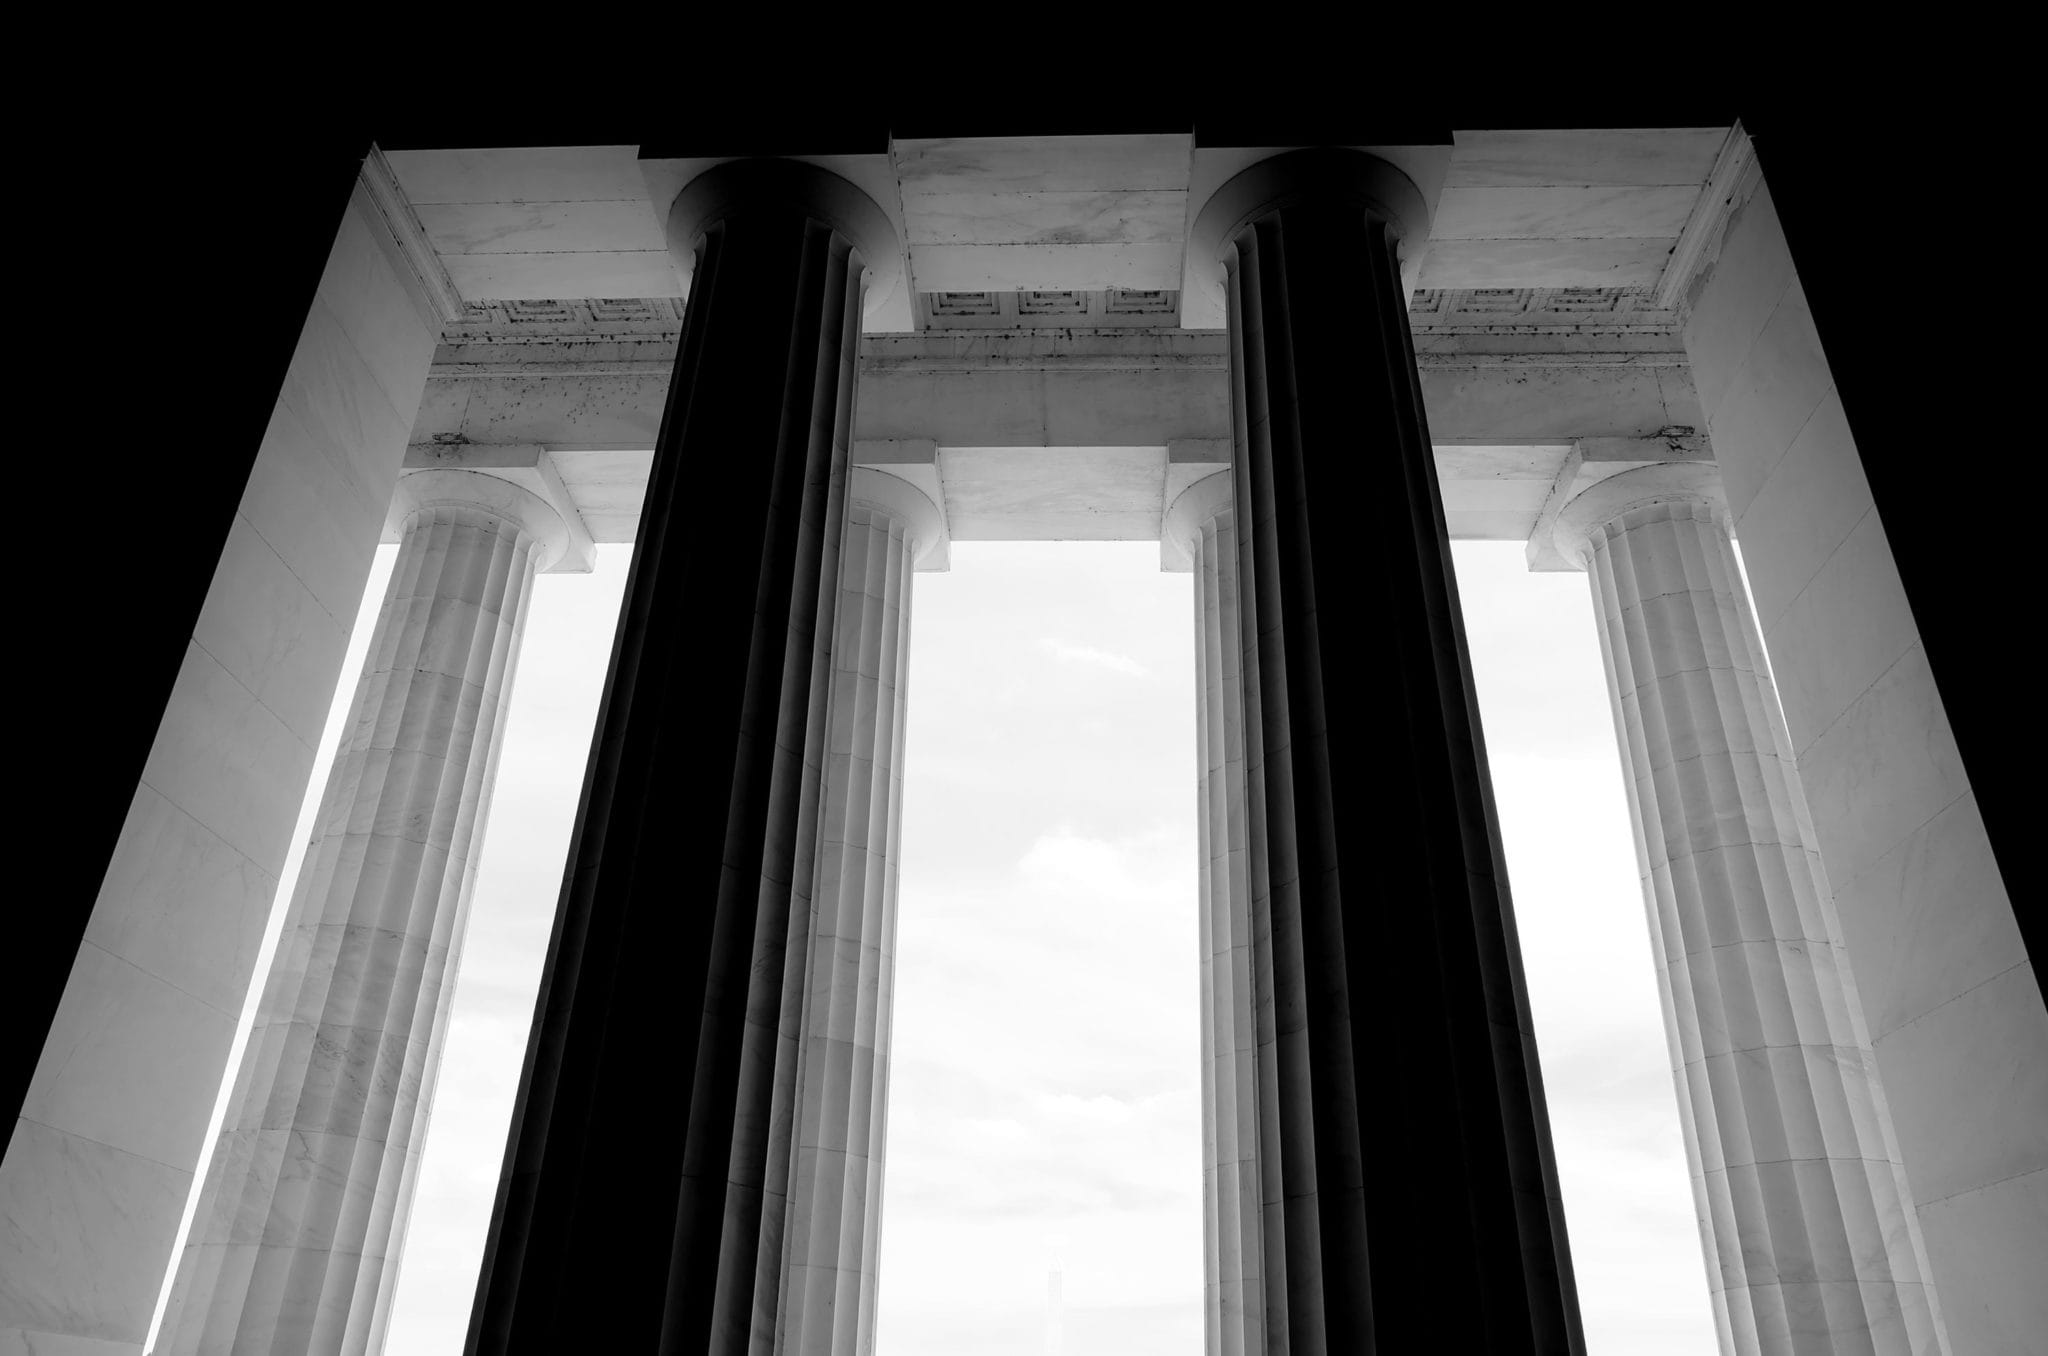 Black and white image of a view through tall, classical columns looking out onto a clear sky.